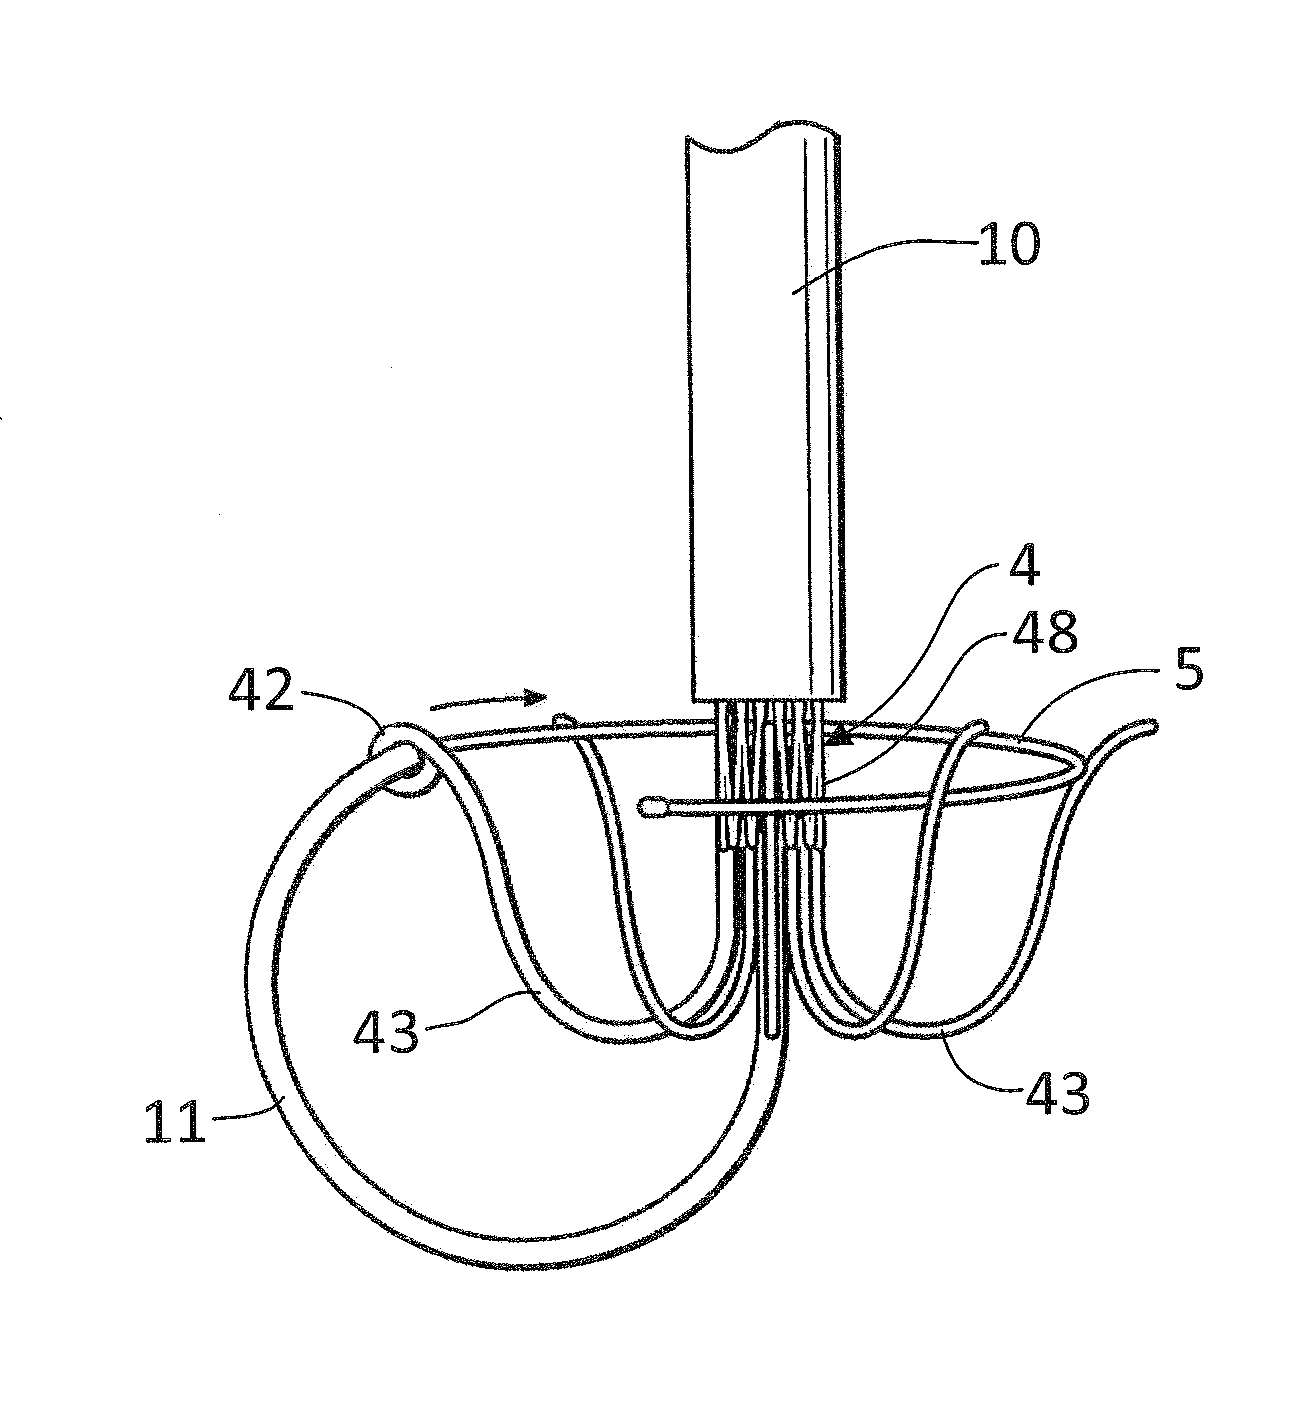 Devices, systems and methods for delivering a prosthetic mitral valve and anchoring device